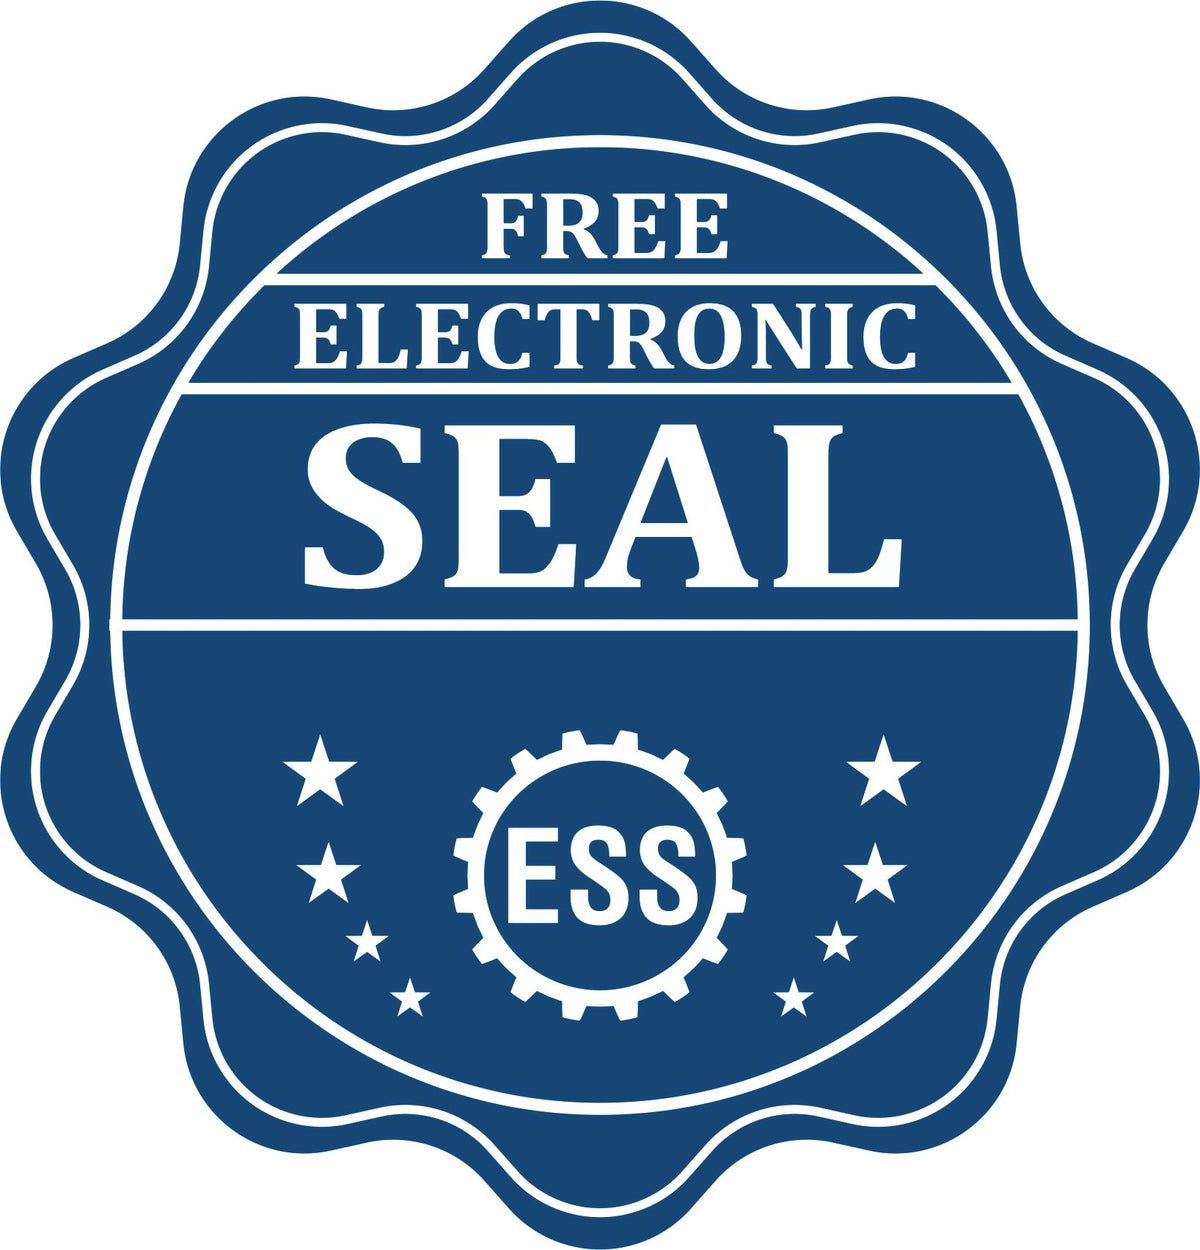 A badge showing a free electronic seal for the Utah Geologist Desk Seal with stars and the ESS gear on the emblem.